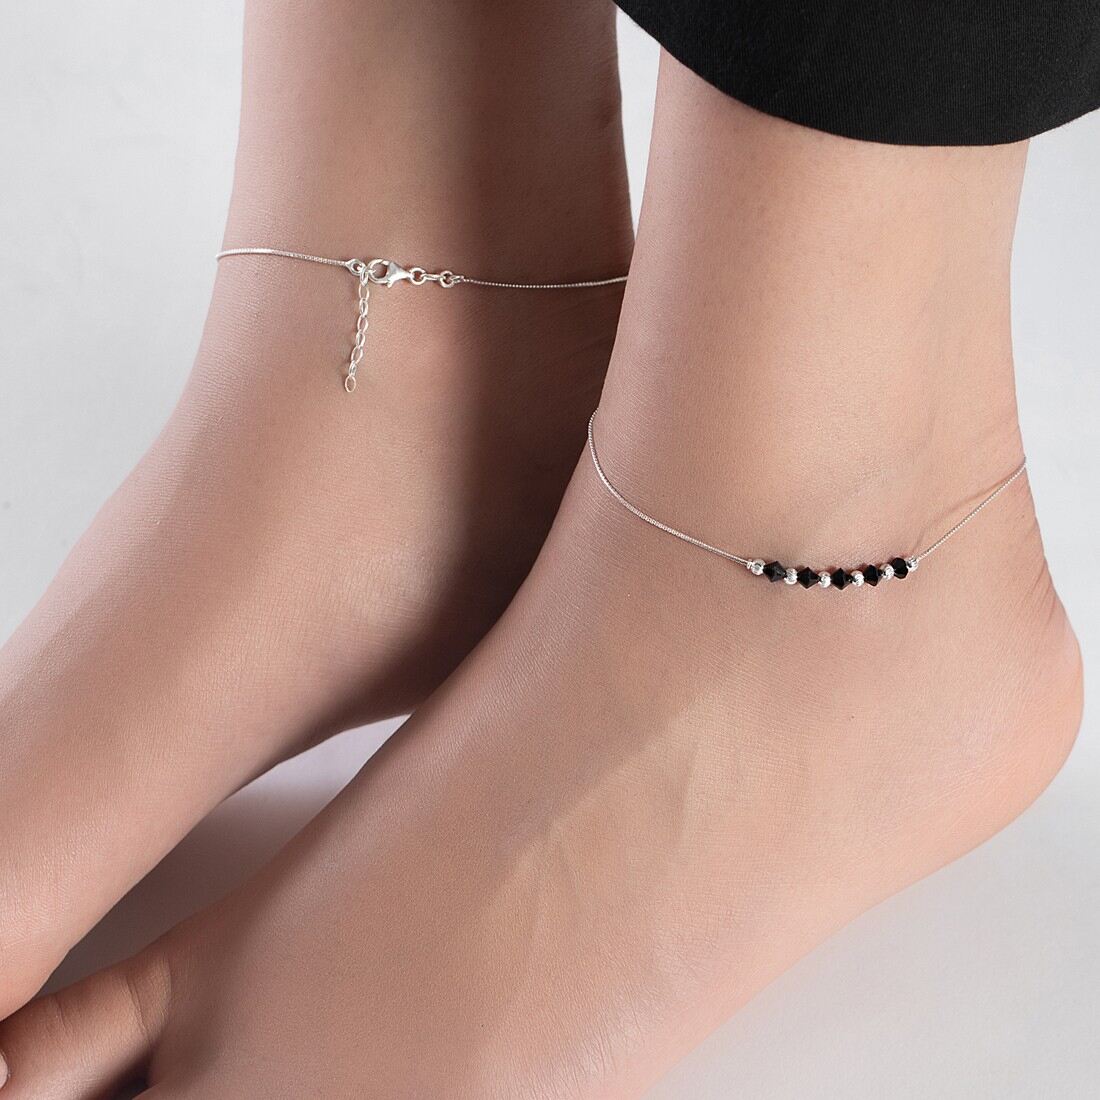 Graceful Whispers Rhodium-Plated 925 Sterling Silver Anklet